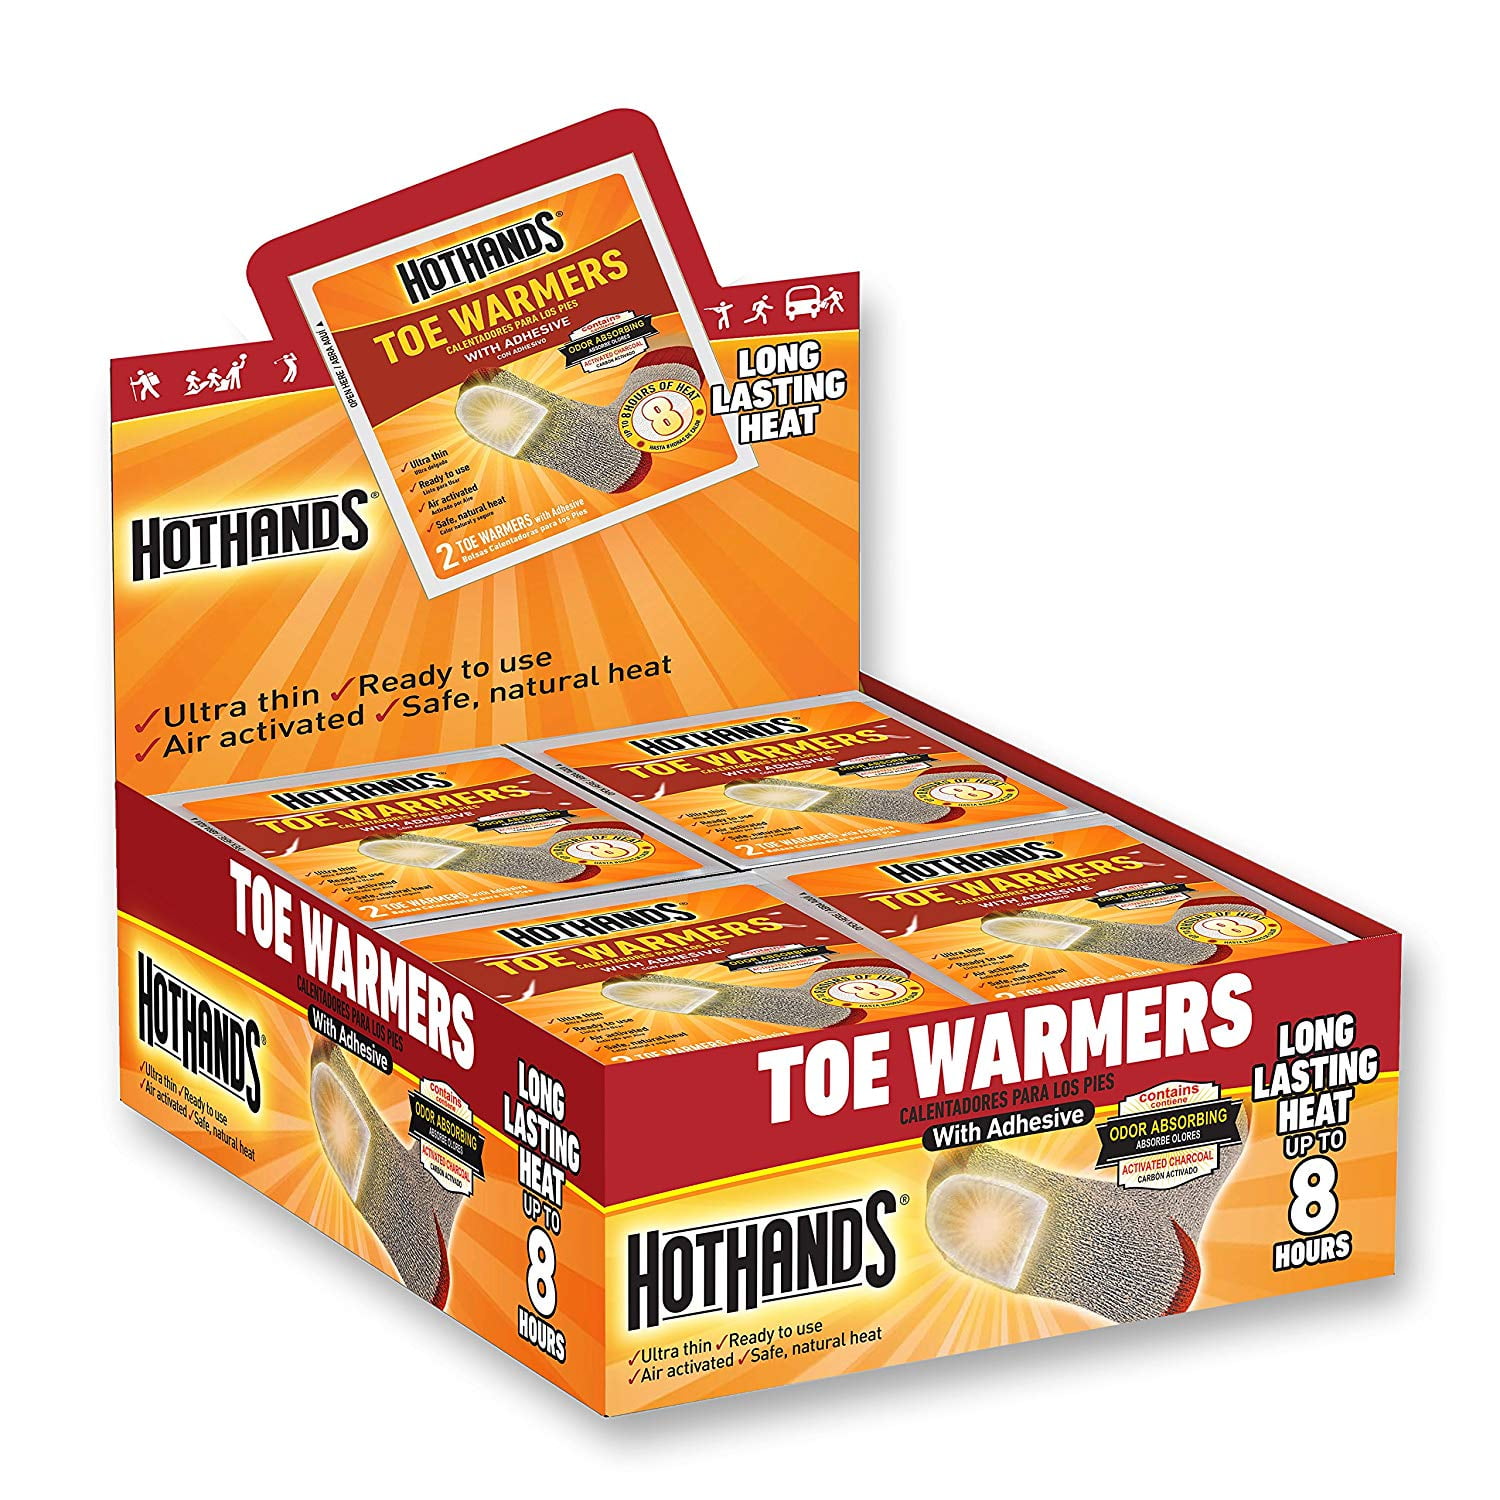 NEW 80 Heatmax Hot Hands 2 Handwarmers Warmers 40 Pairs Outdoor Camping NEW 